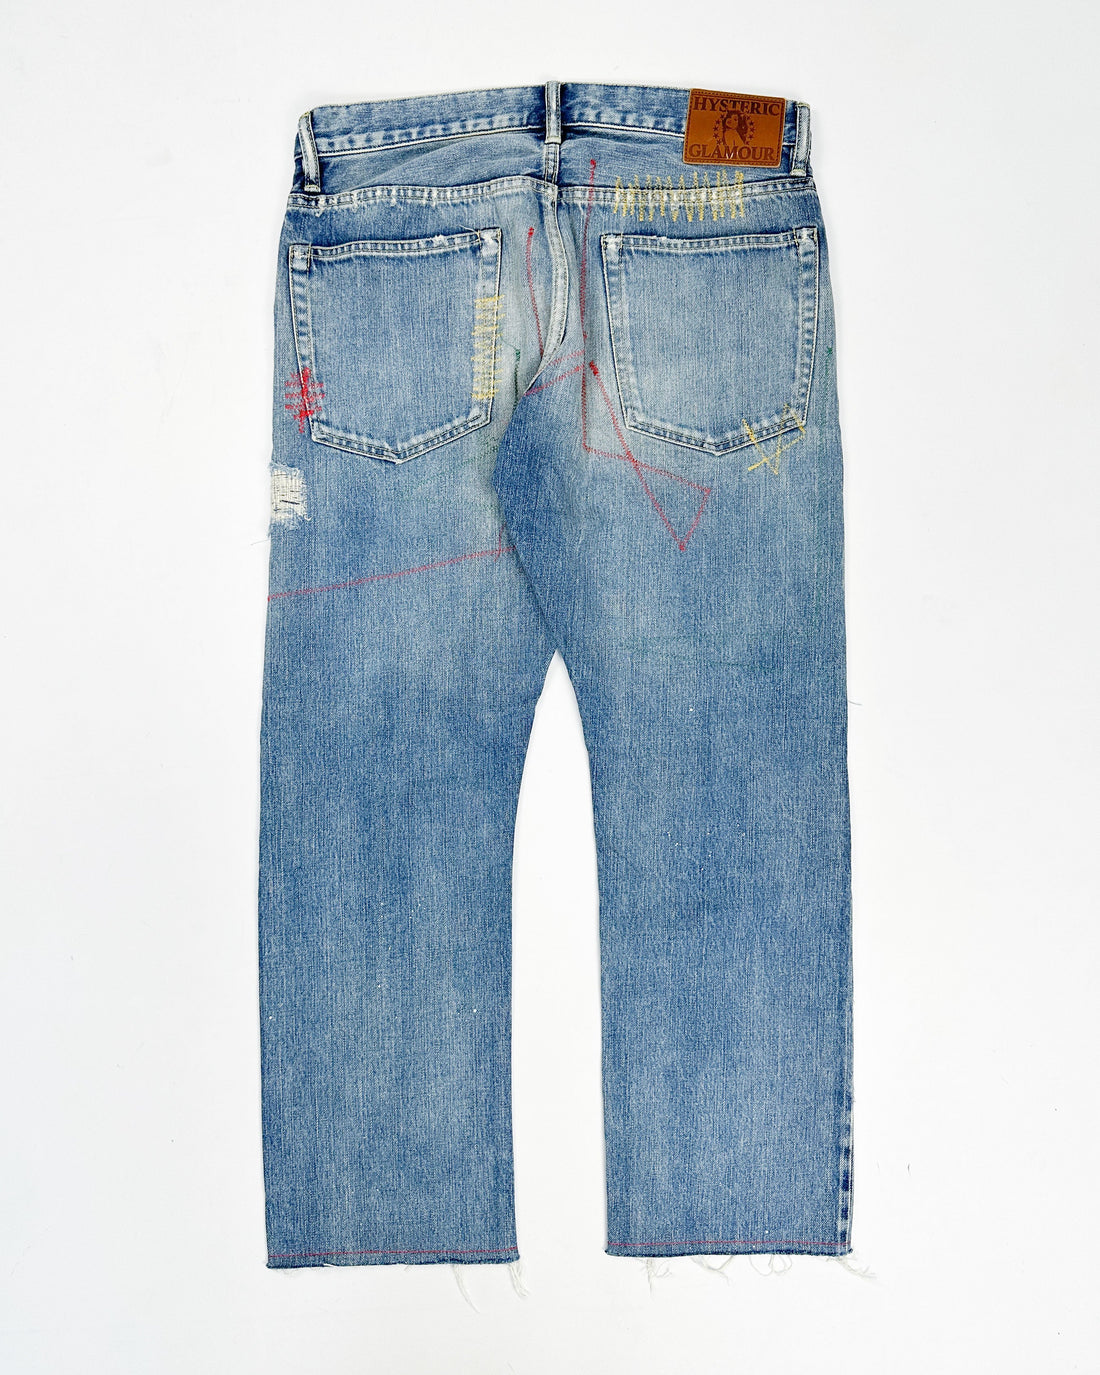 Hysteric Glamour Distressed Patches Bootcut Denim Pants 2000's